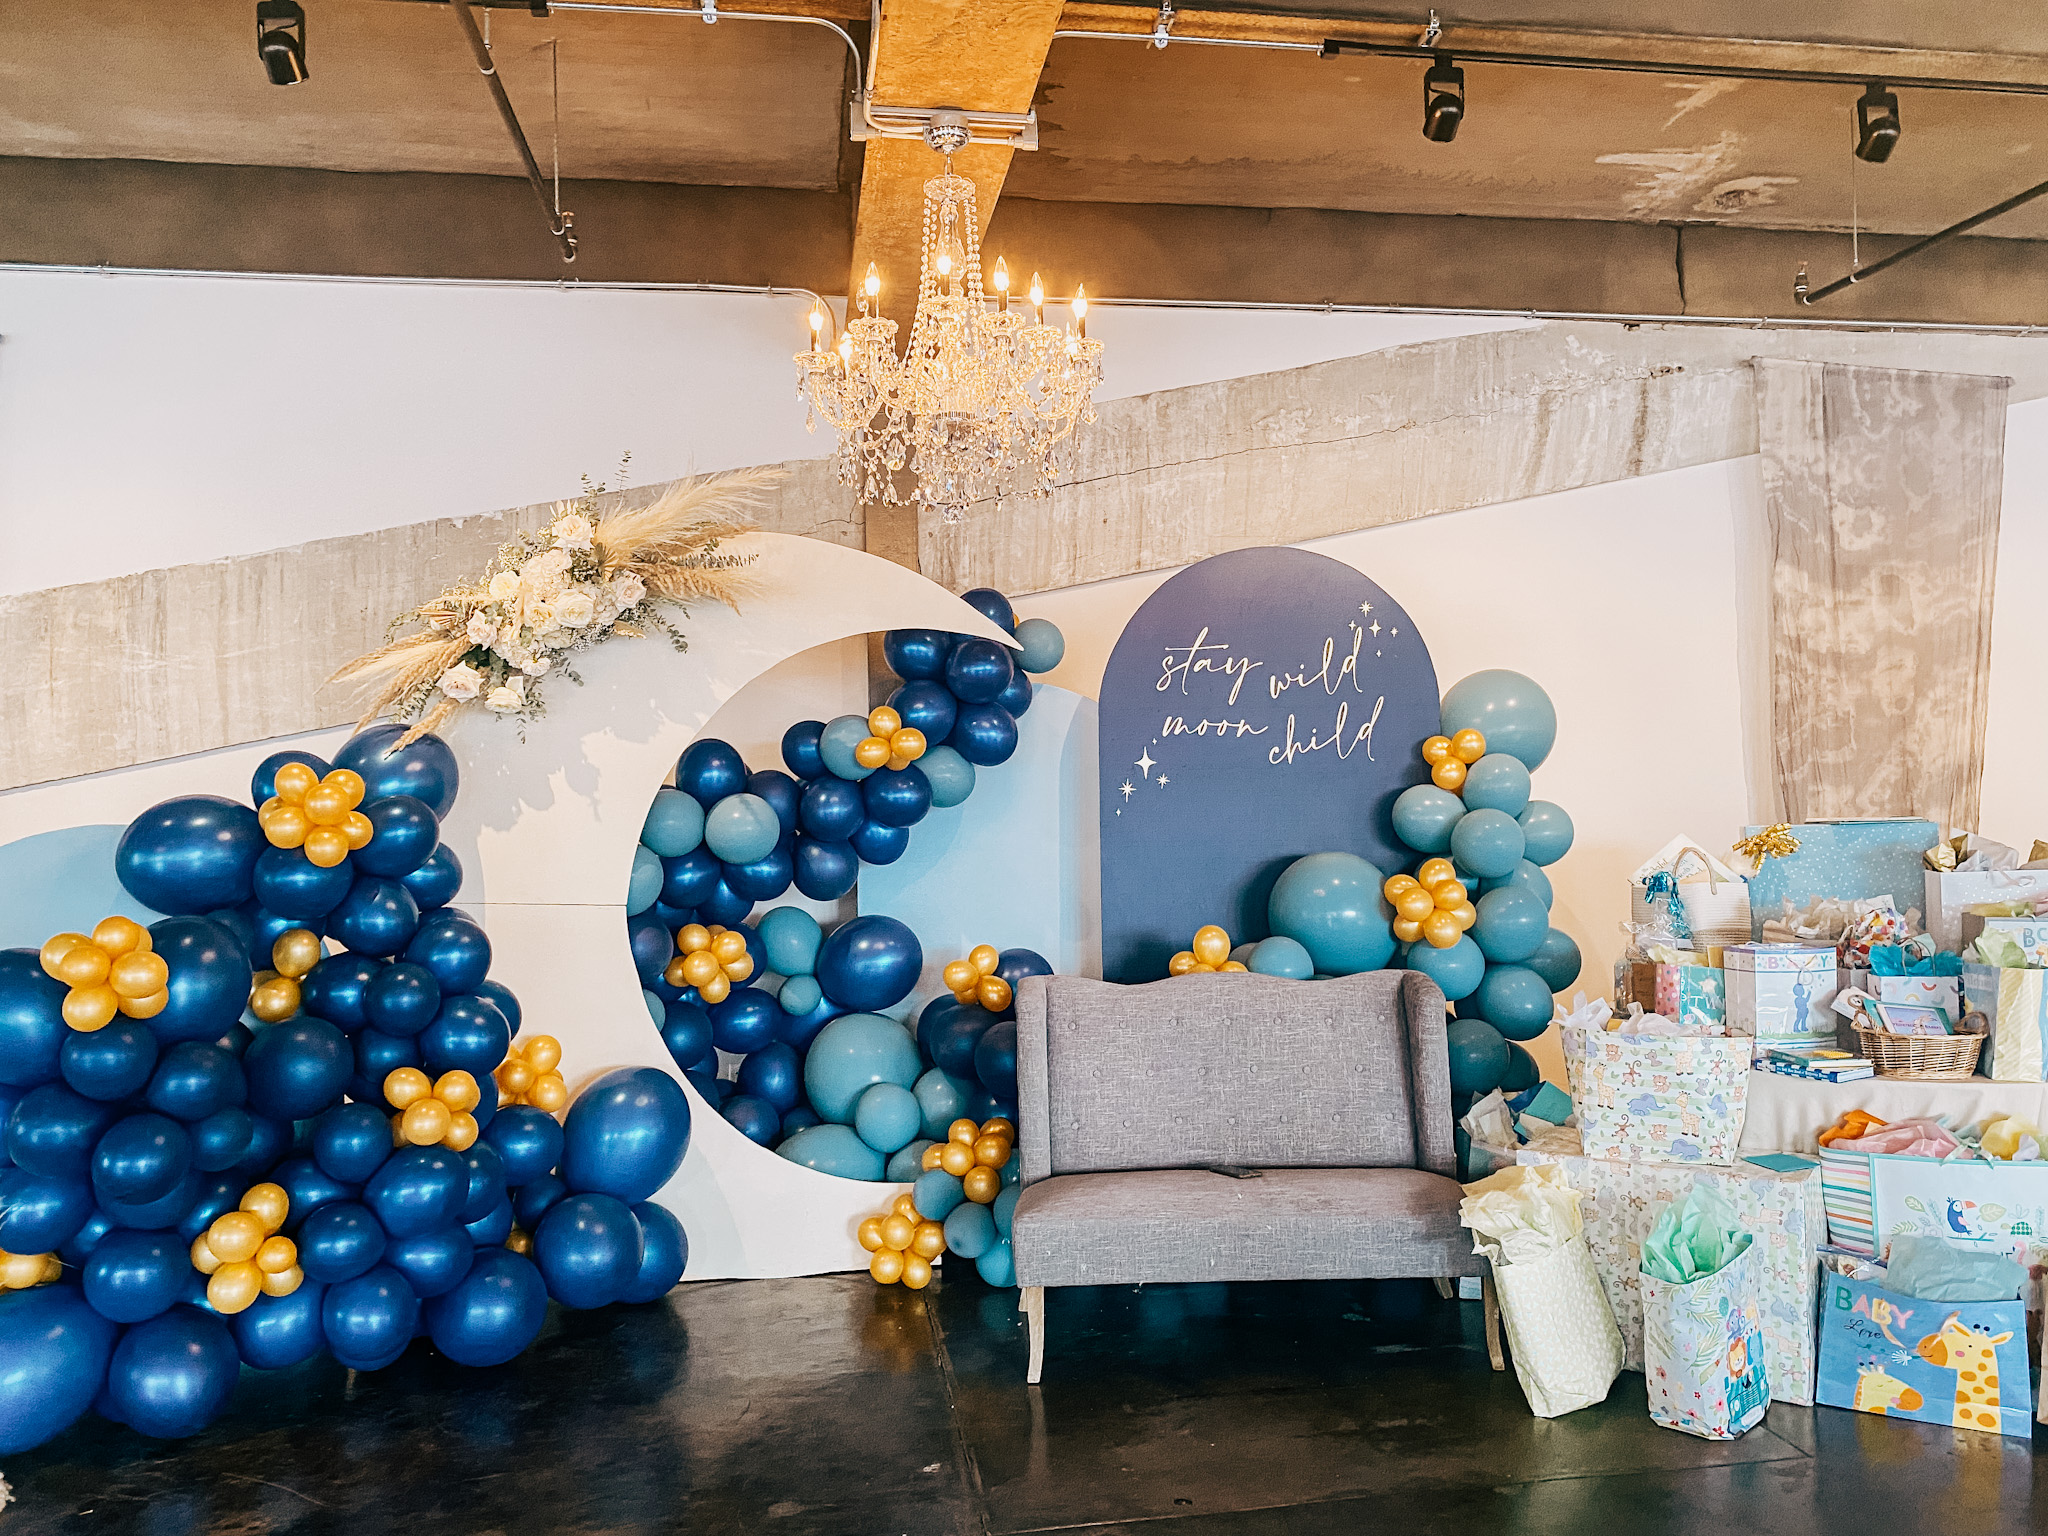 Colorful Baby Shower - Inspired By This